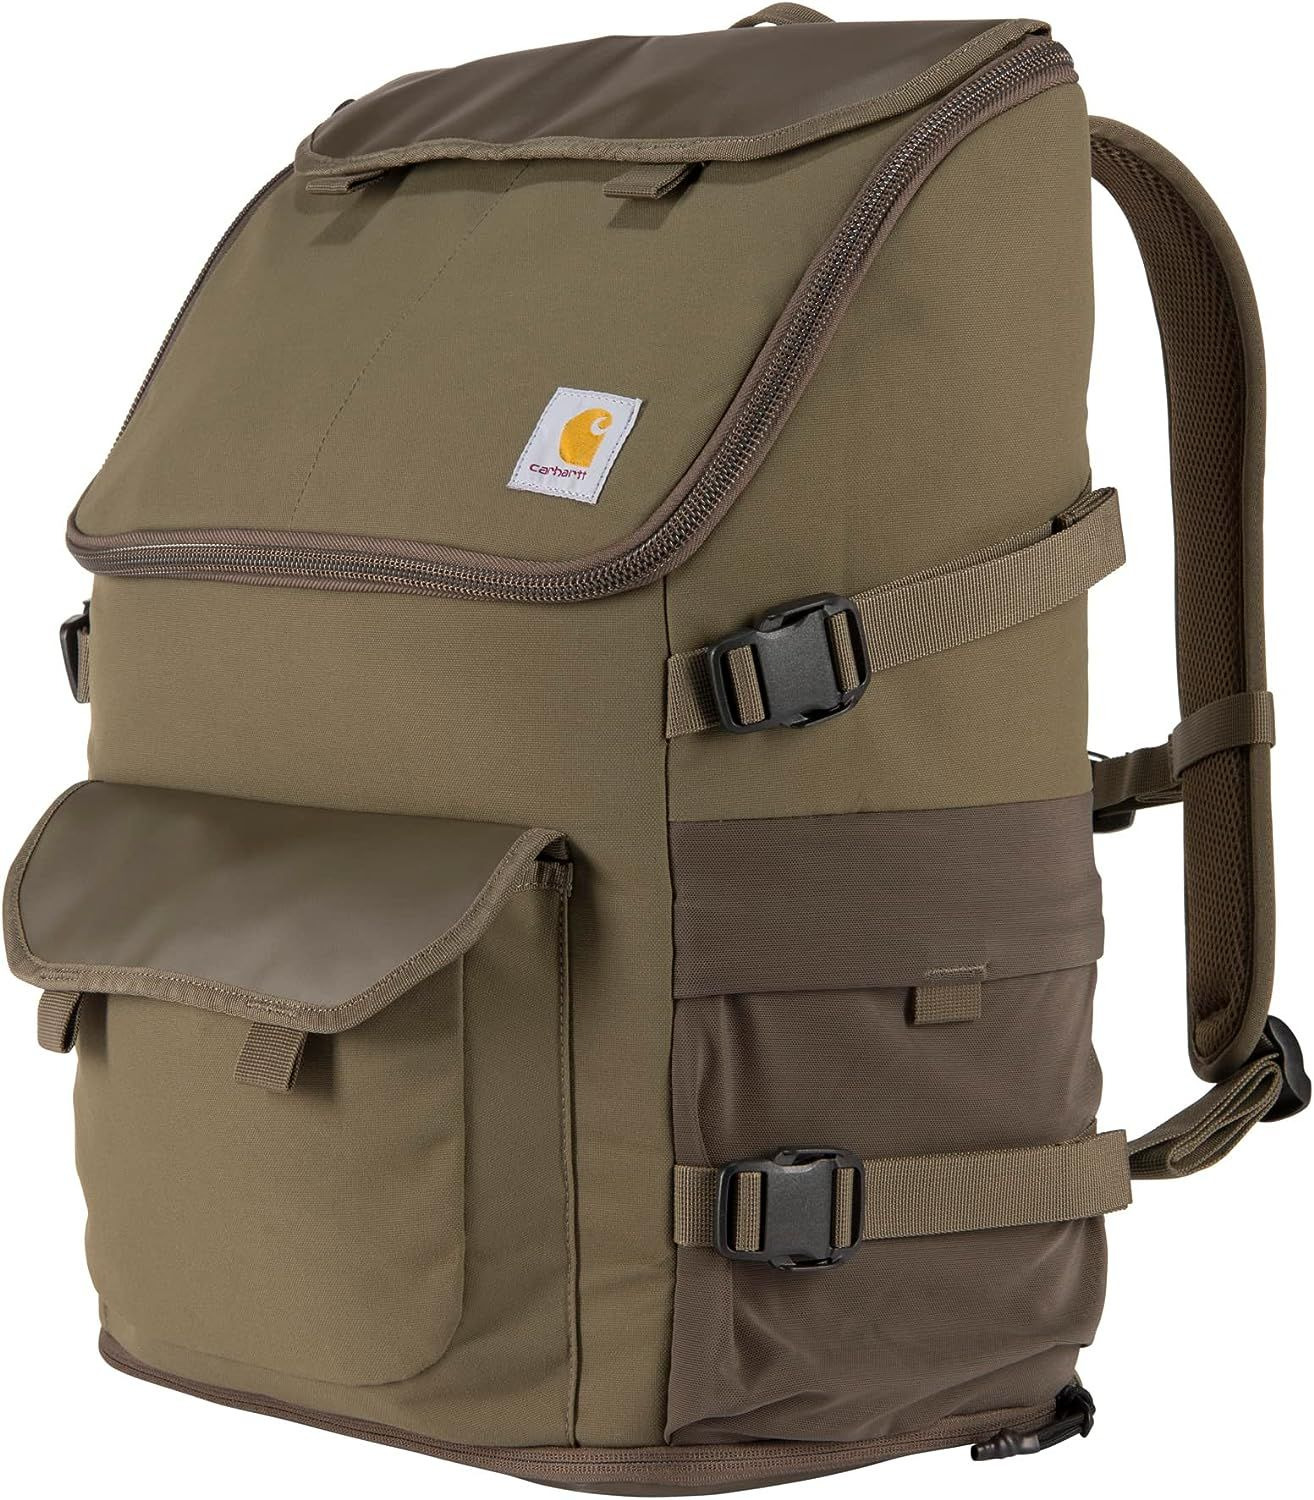 Carhartt 35L Nylon Workday Backpack, Durable Water-Resistant One Size, Tarmac 